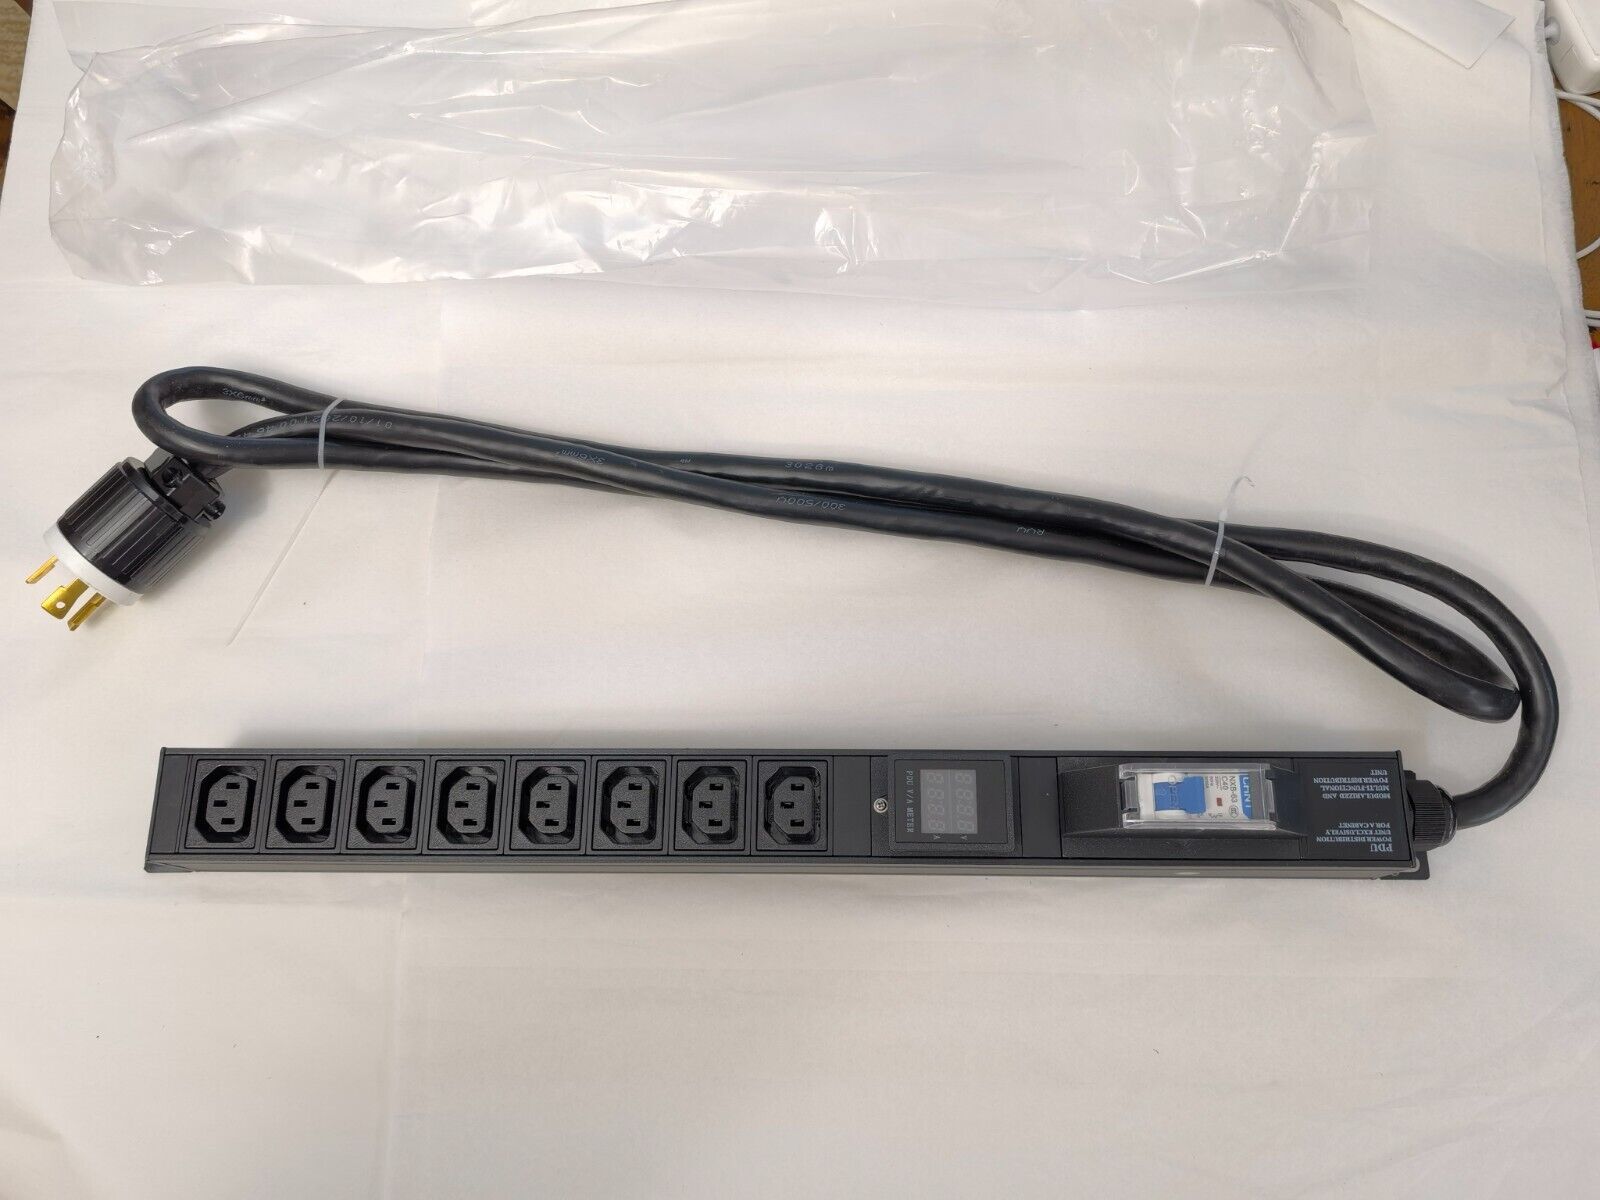 LCD Metered/Breaker PDU 240V 30A L6-30P 8x C13 Cryptocurrency Mining Rack